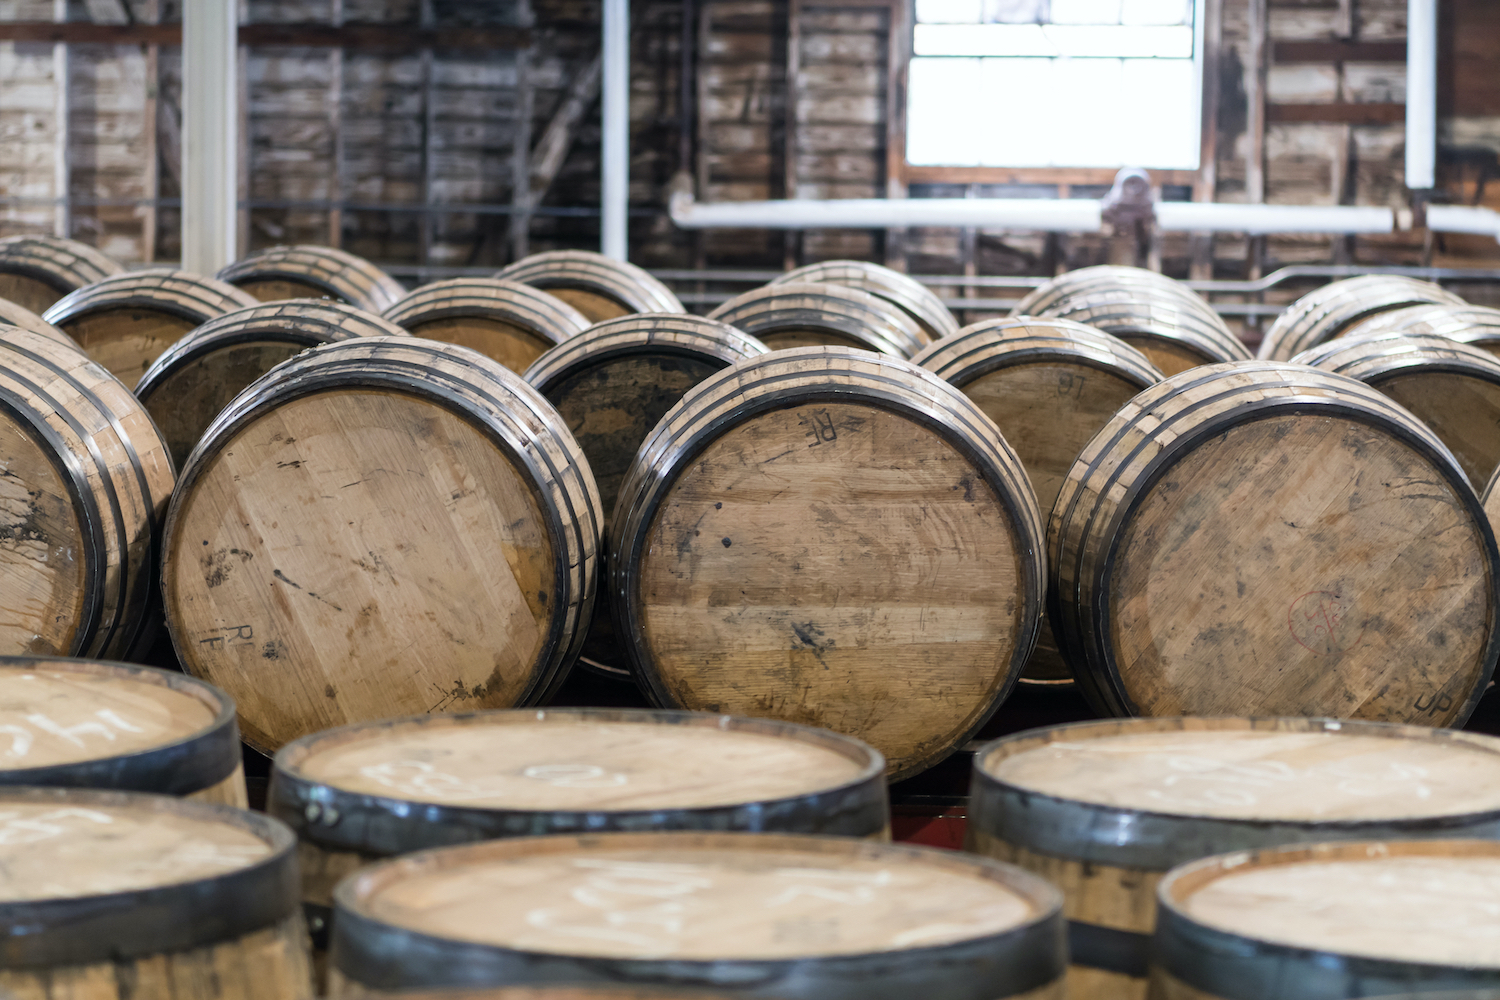 America’s First Family of Bourbon: The Beams